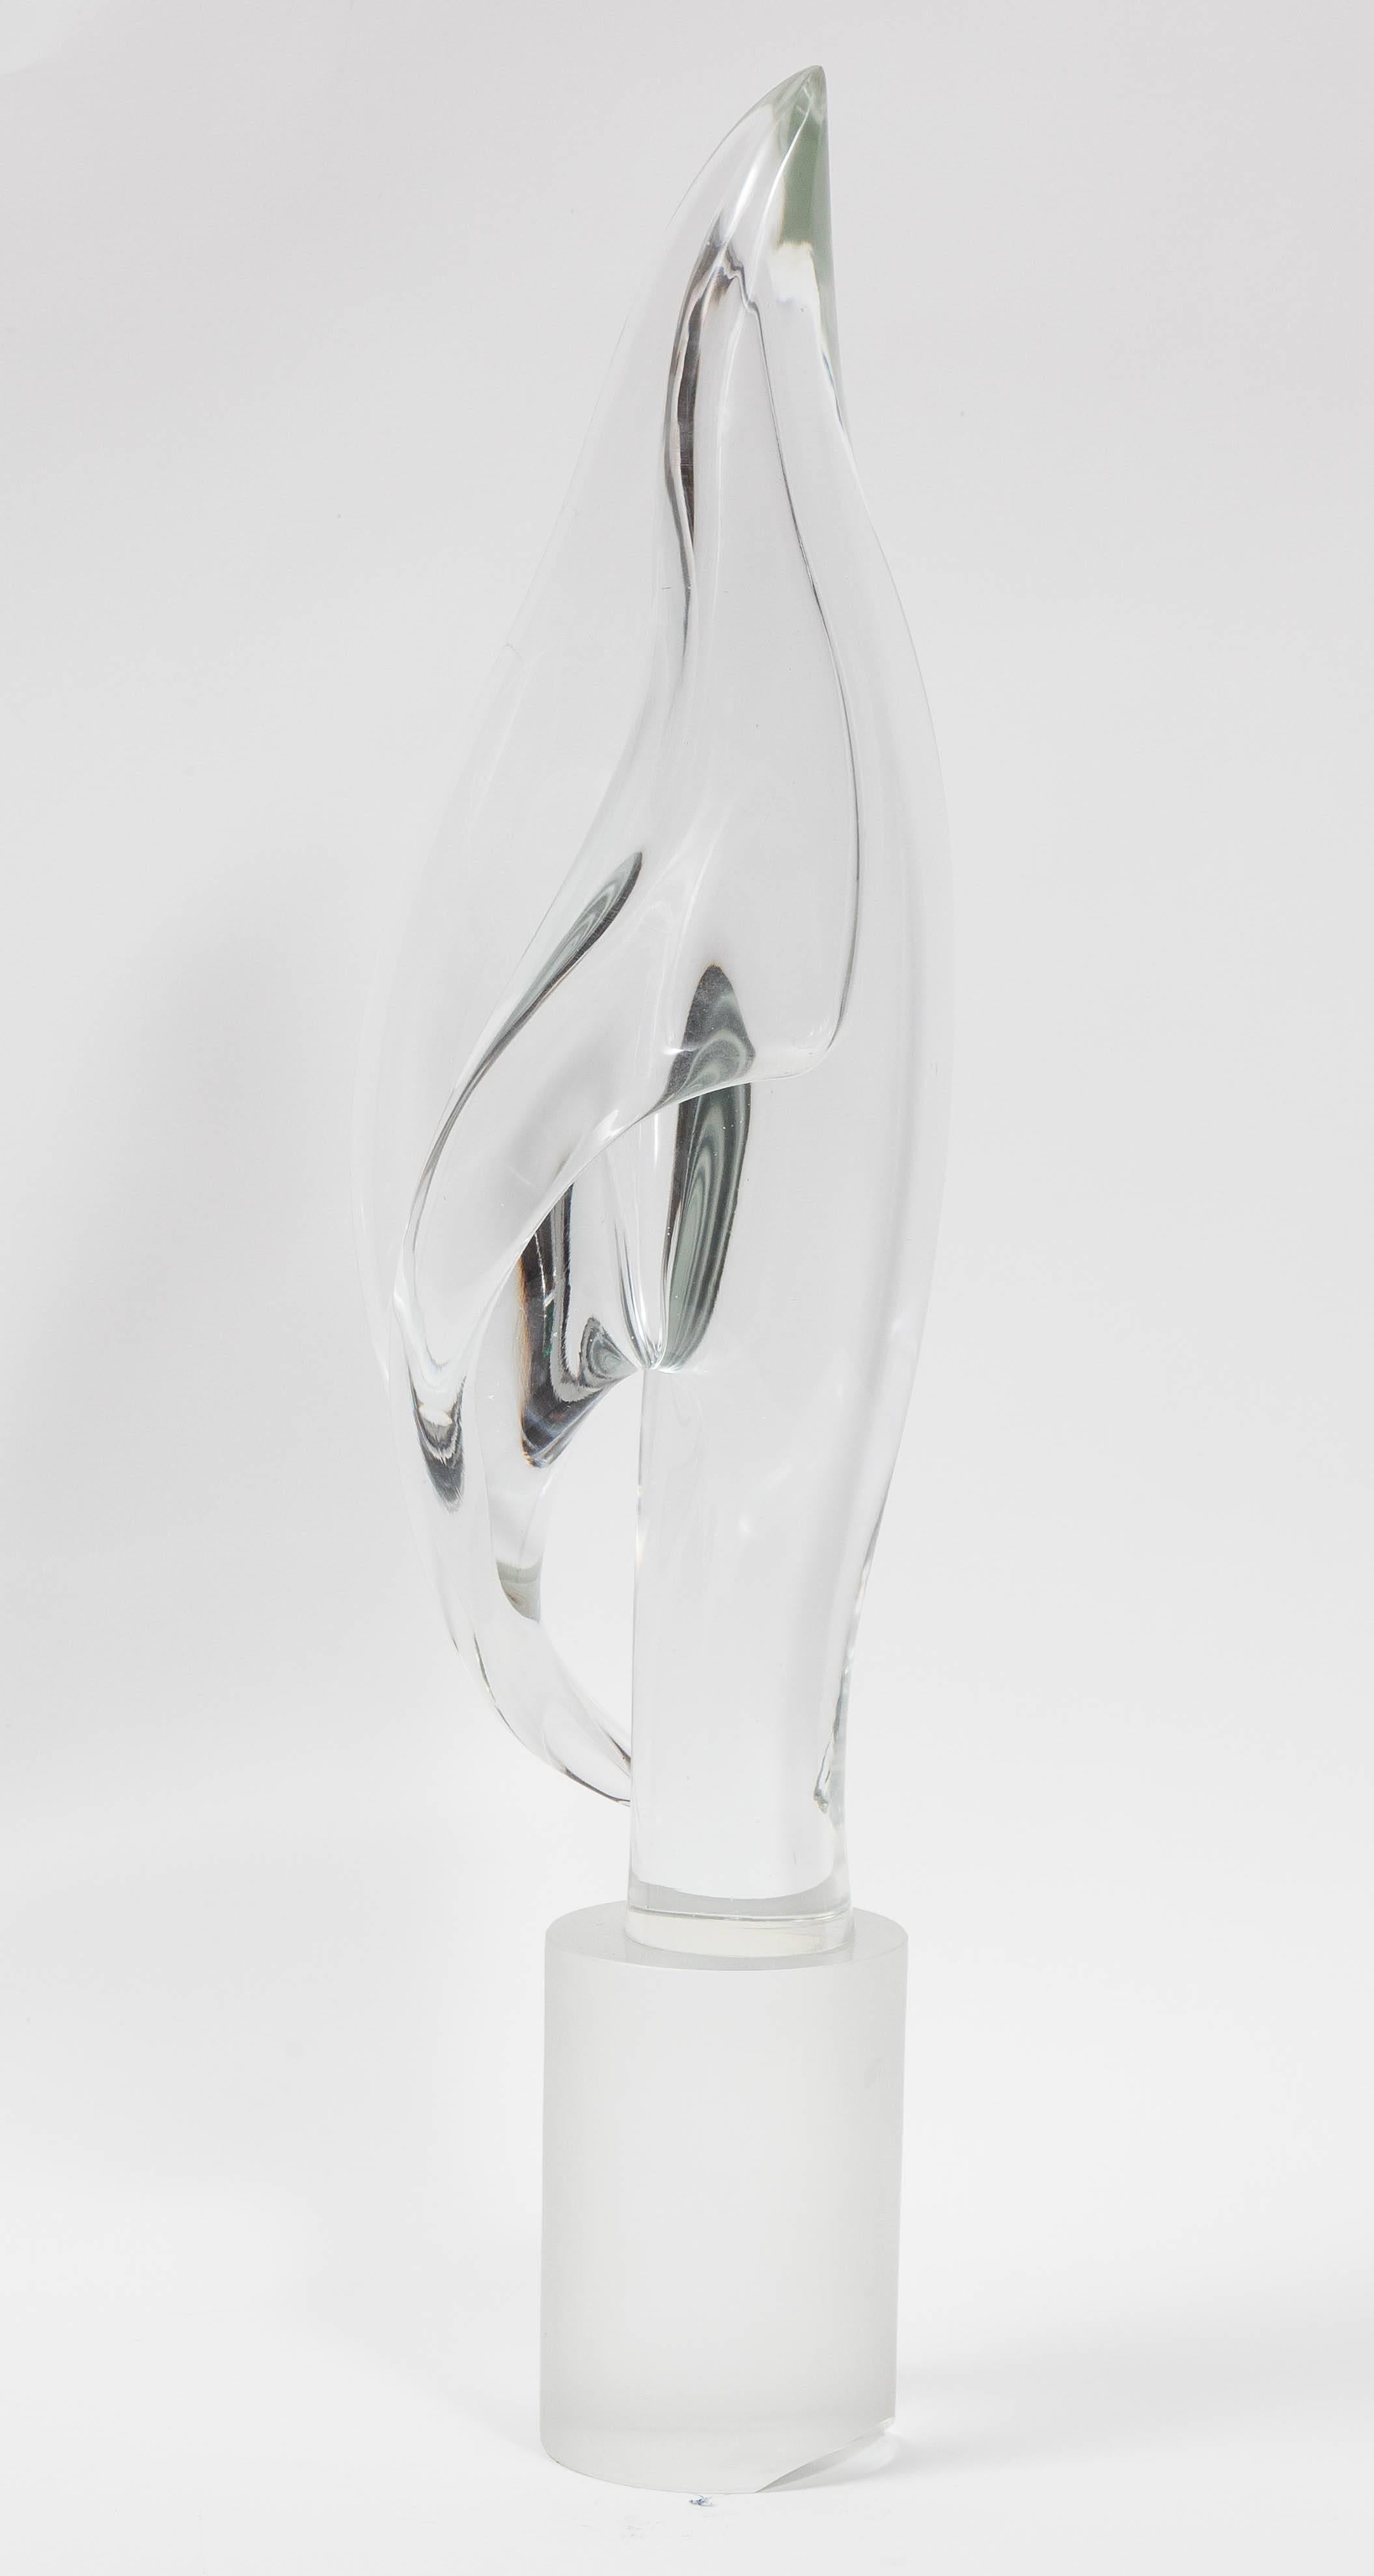 This graceful work consists of a clear glass flame-like design on a cylindrical frosted glass base. The piece has an ethereal quality about it, and can add star power to a room without taking up too much air space. Signed Livio Seguso.